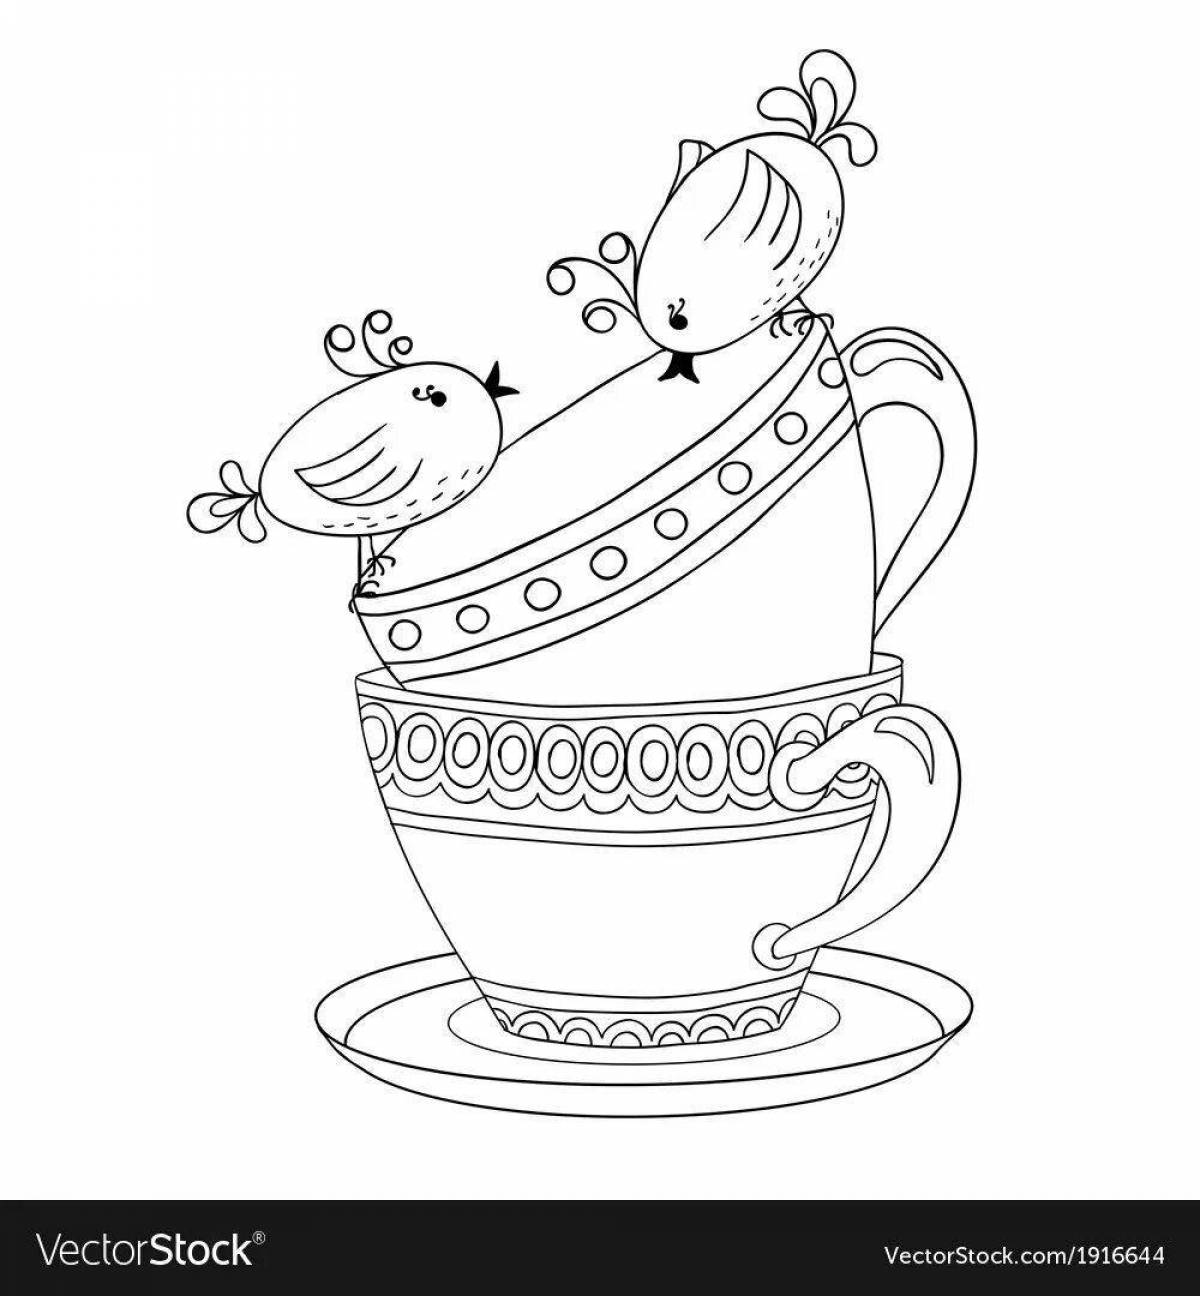 Bright samovar coloring book for children 6-7 years old